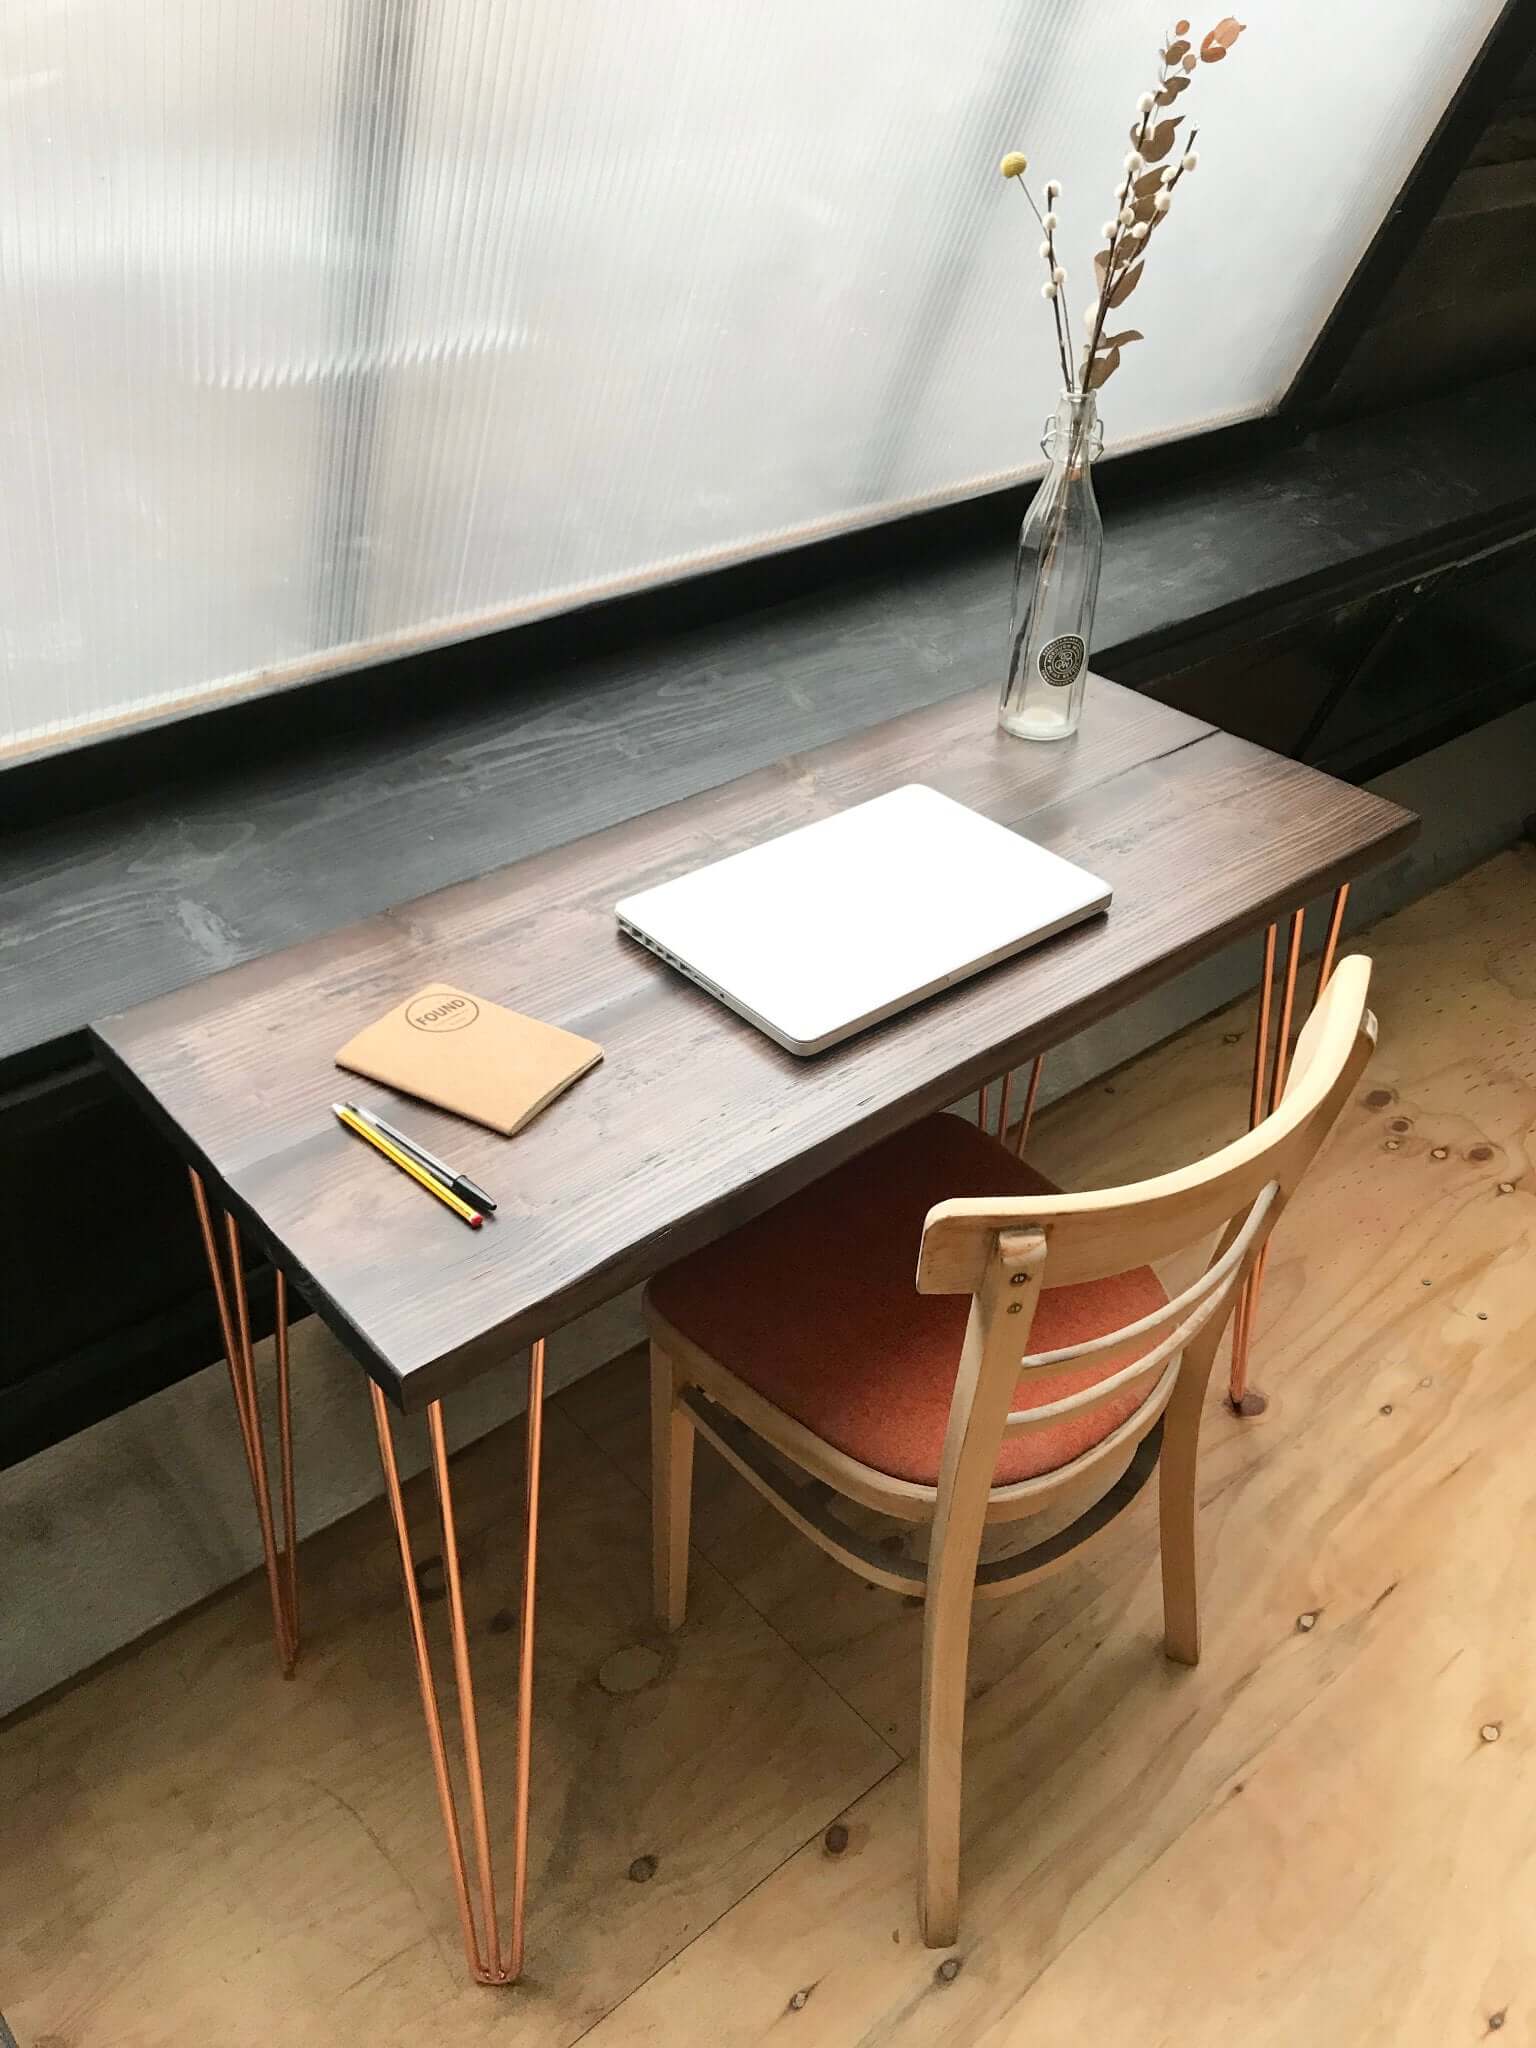 Reclaimed wood desk with hairpin legs.